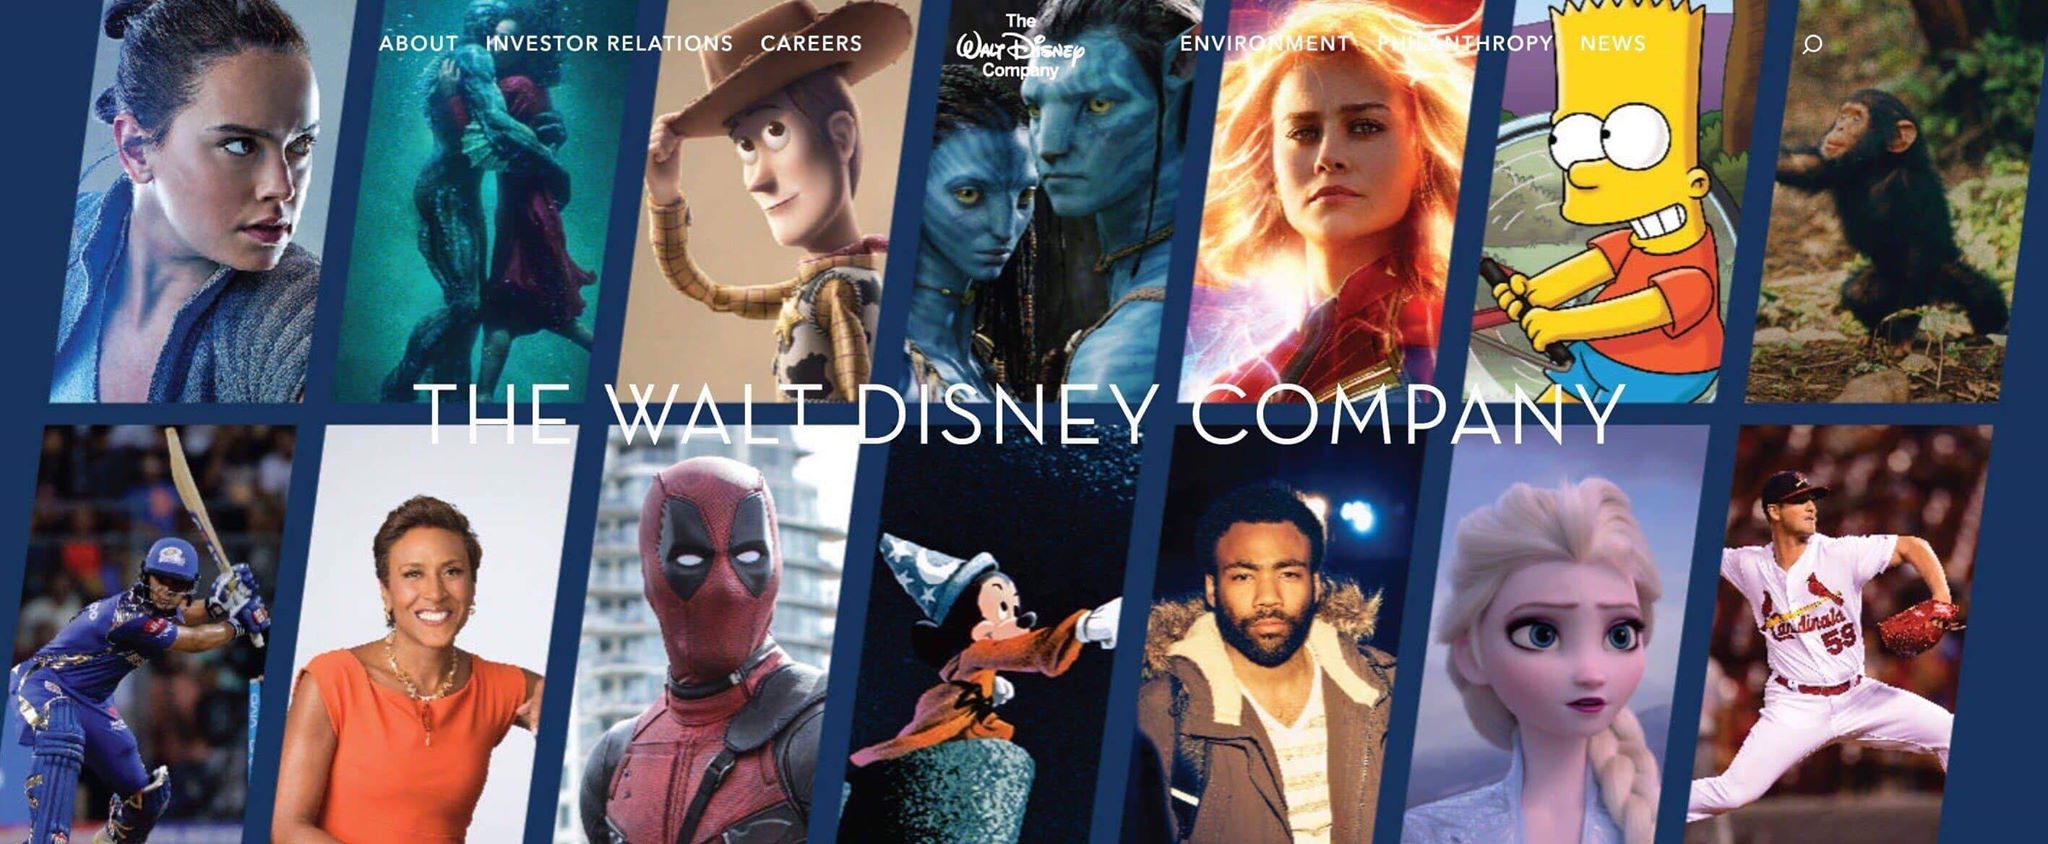 Disney Makes an Official Statement about 21st Century Fox Purchase